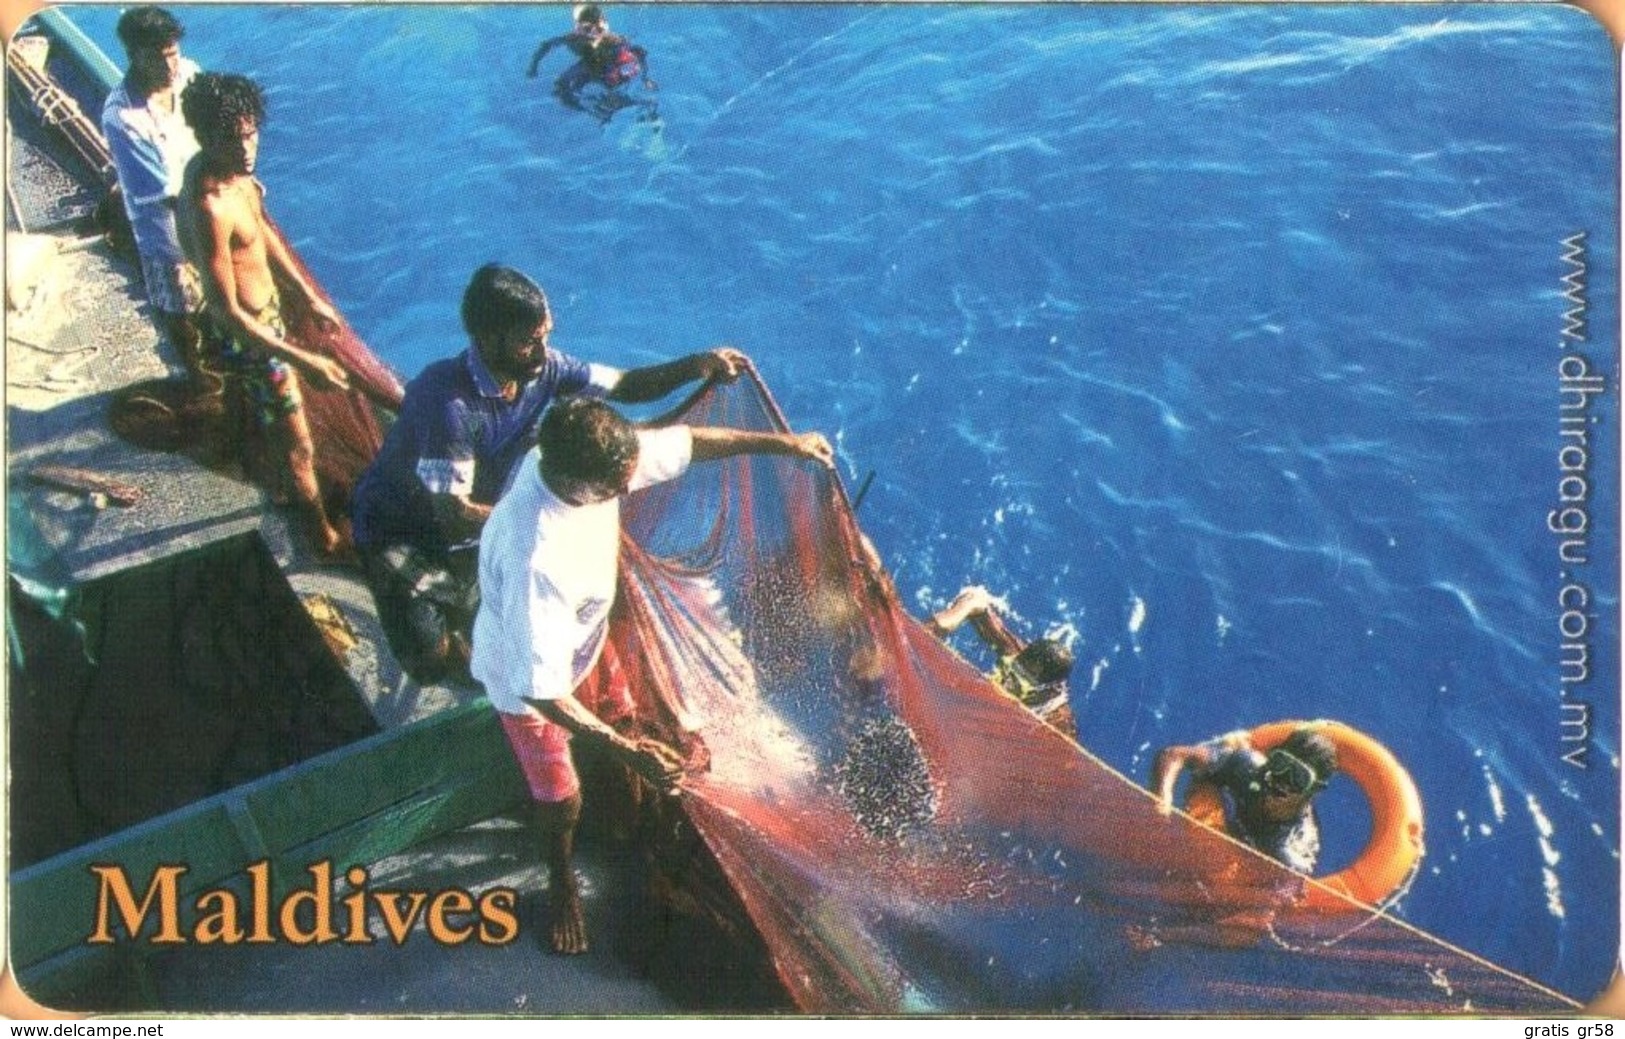 Maldives - MAL-C-23A, Fishermen And Swimmers, Fishery, 2/02, Used As Scan - Maldives